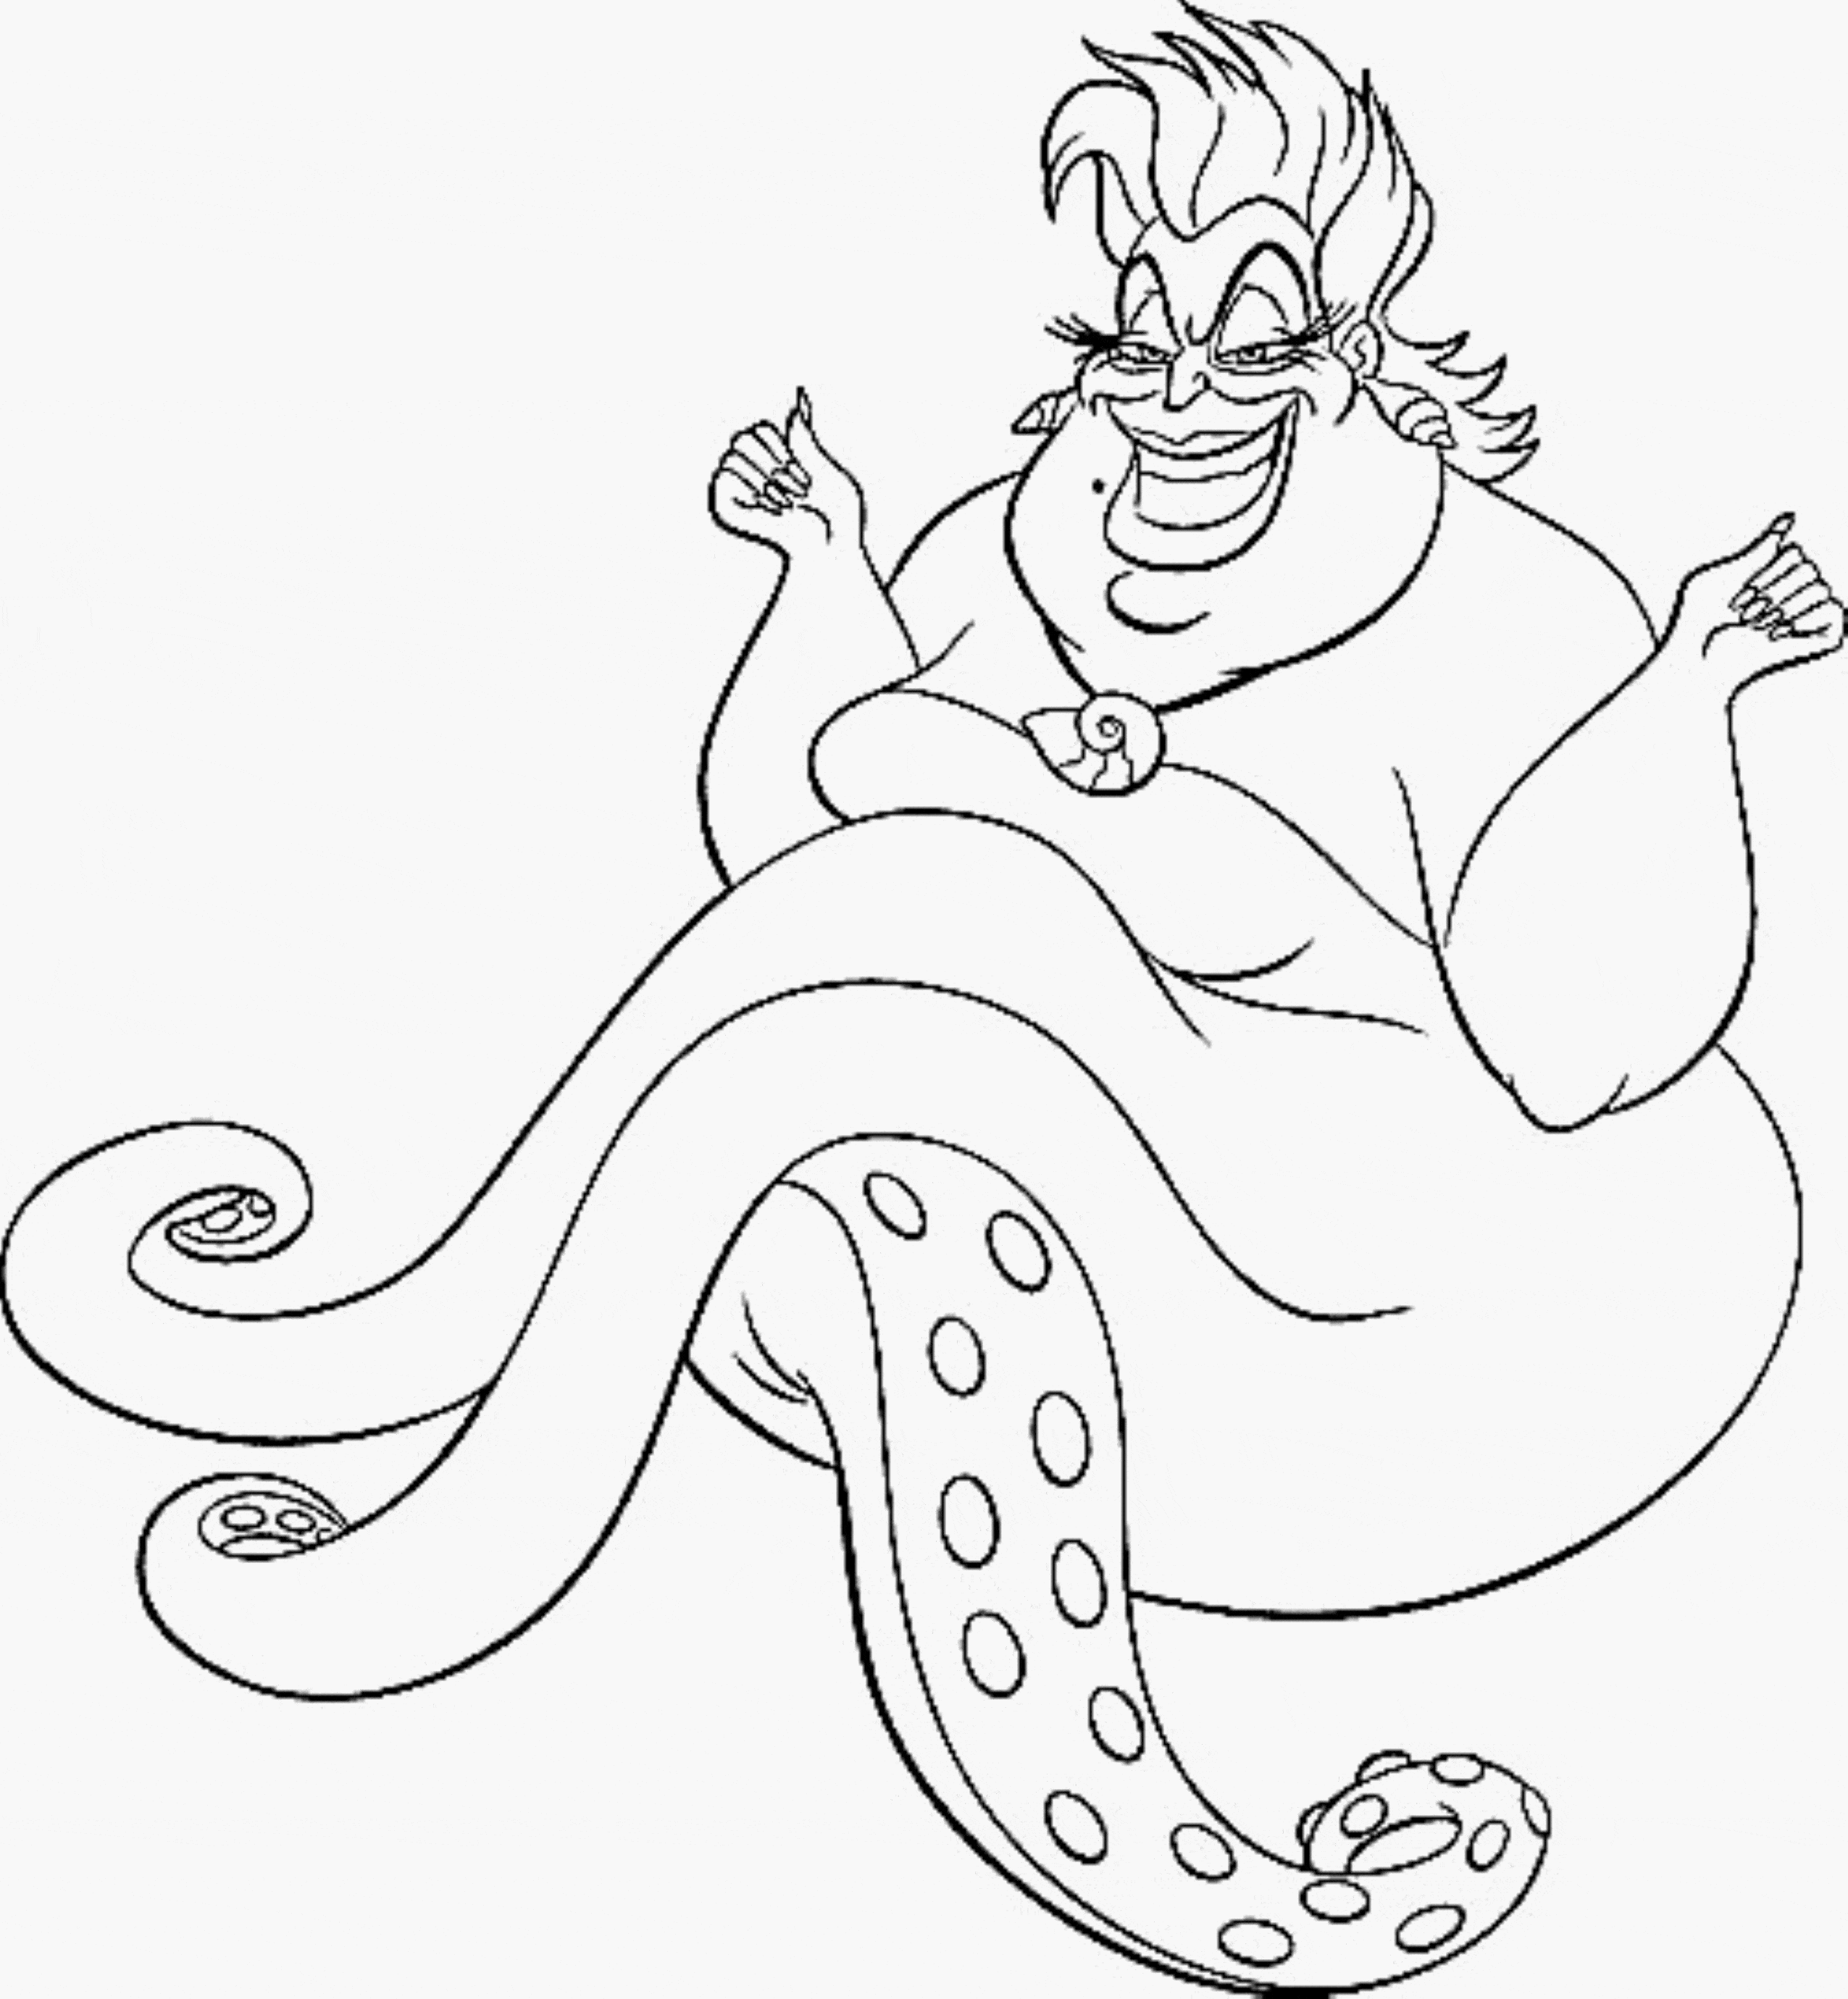 Print Download Find the Suitable Little Mermaid